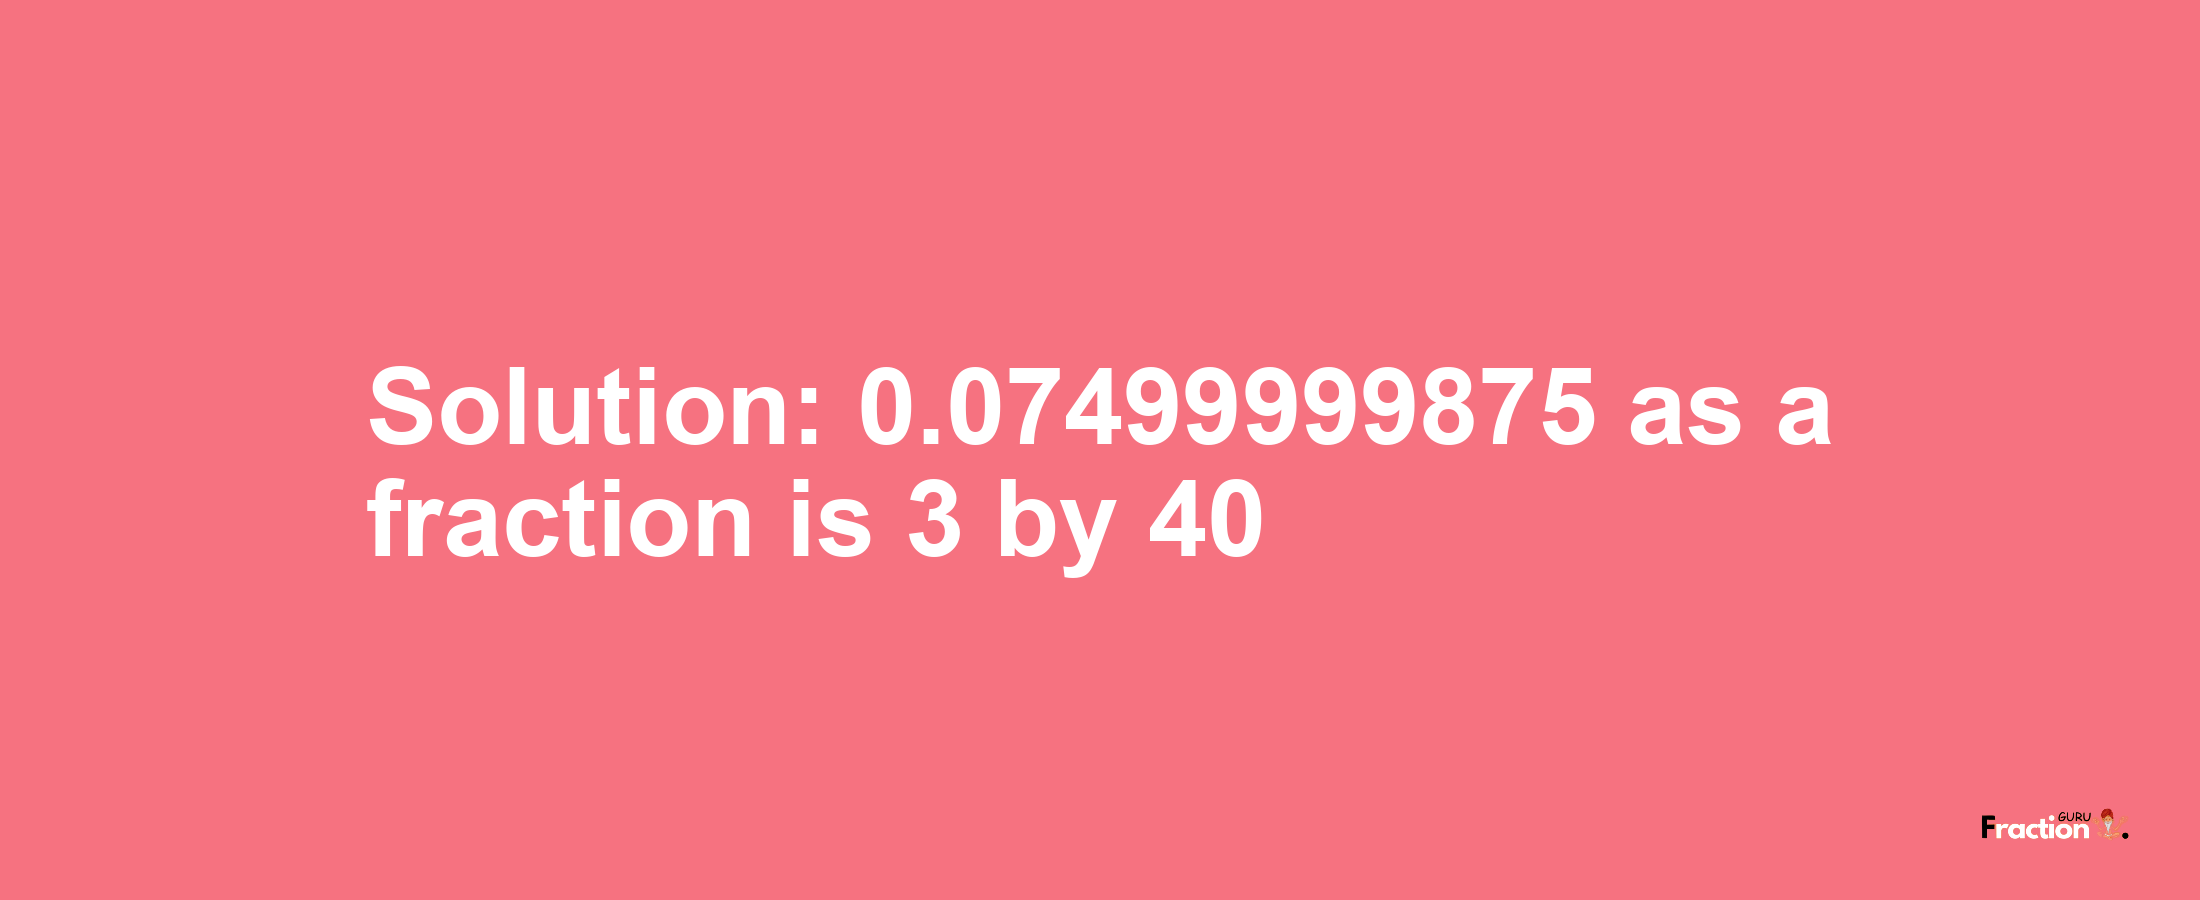 Solution:0.07499999875 as a fraction is 3/40